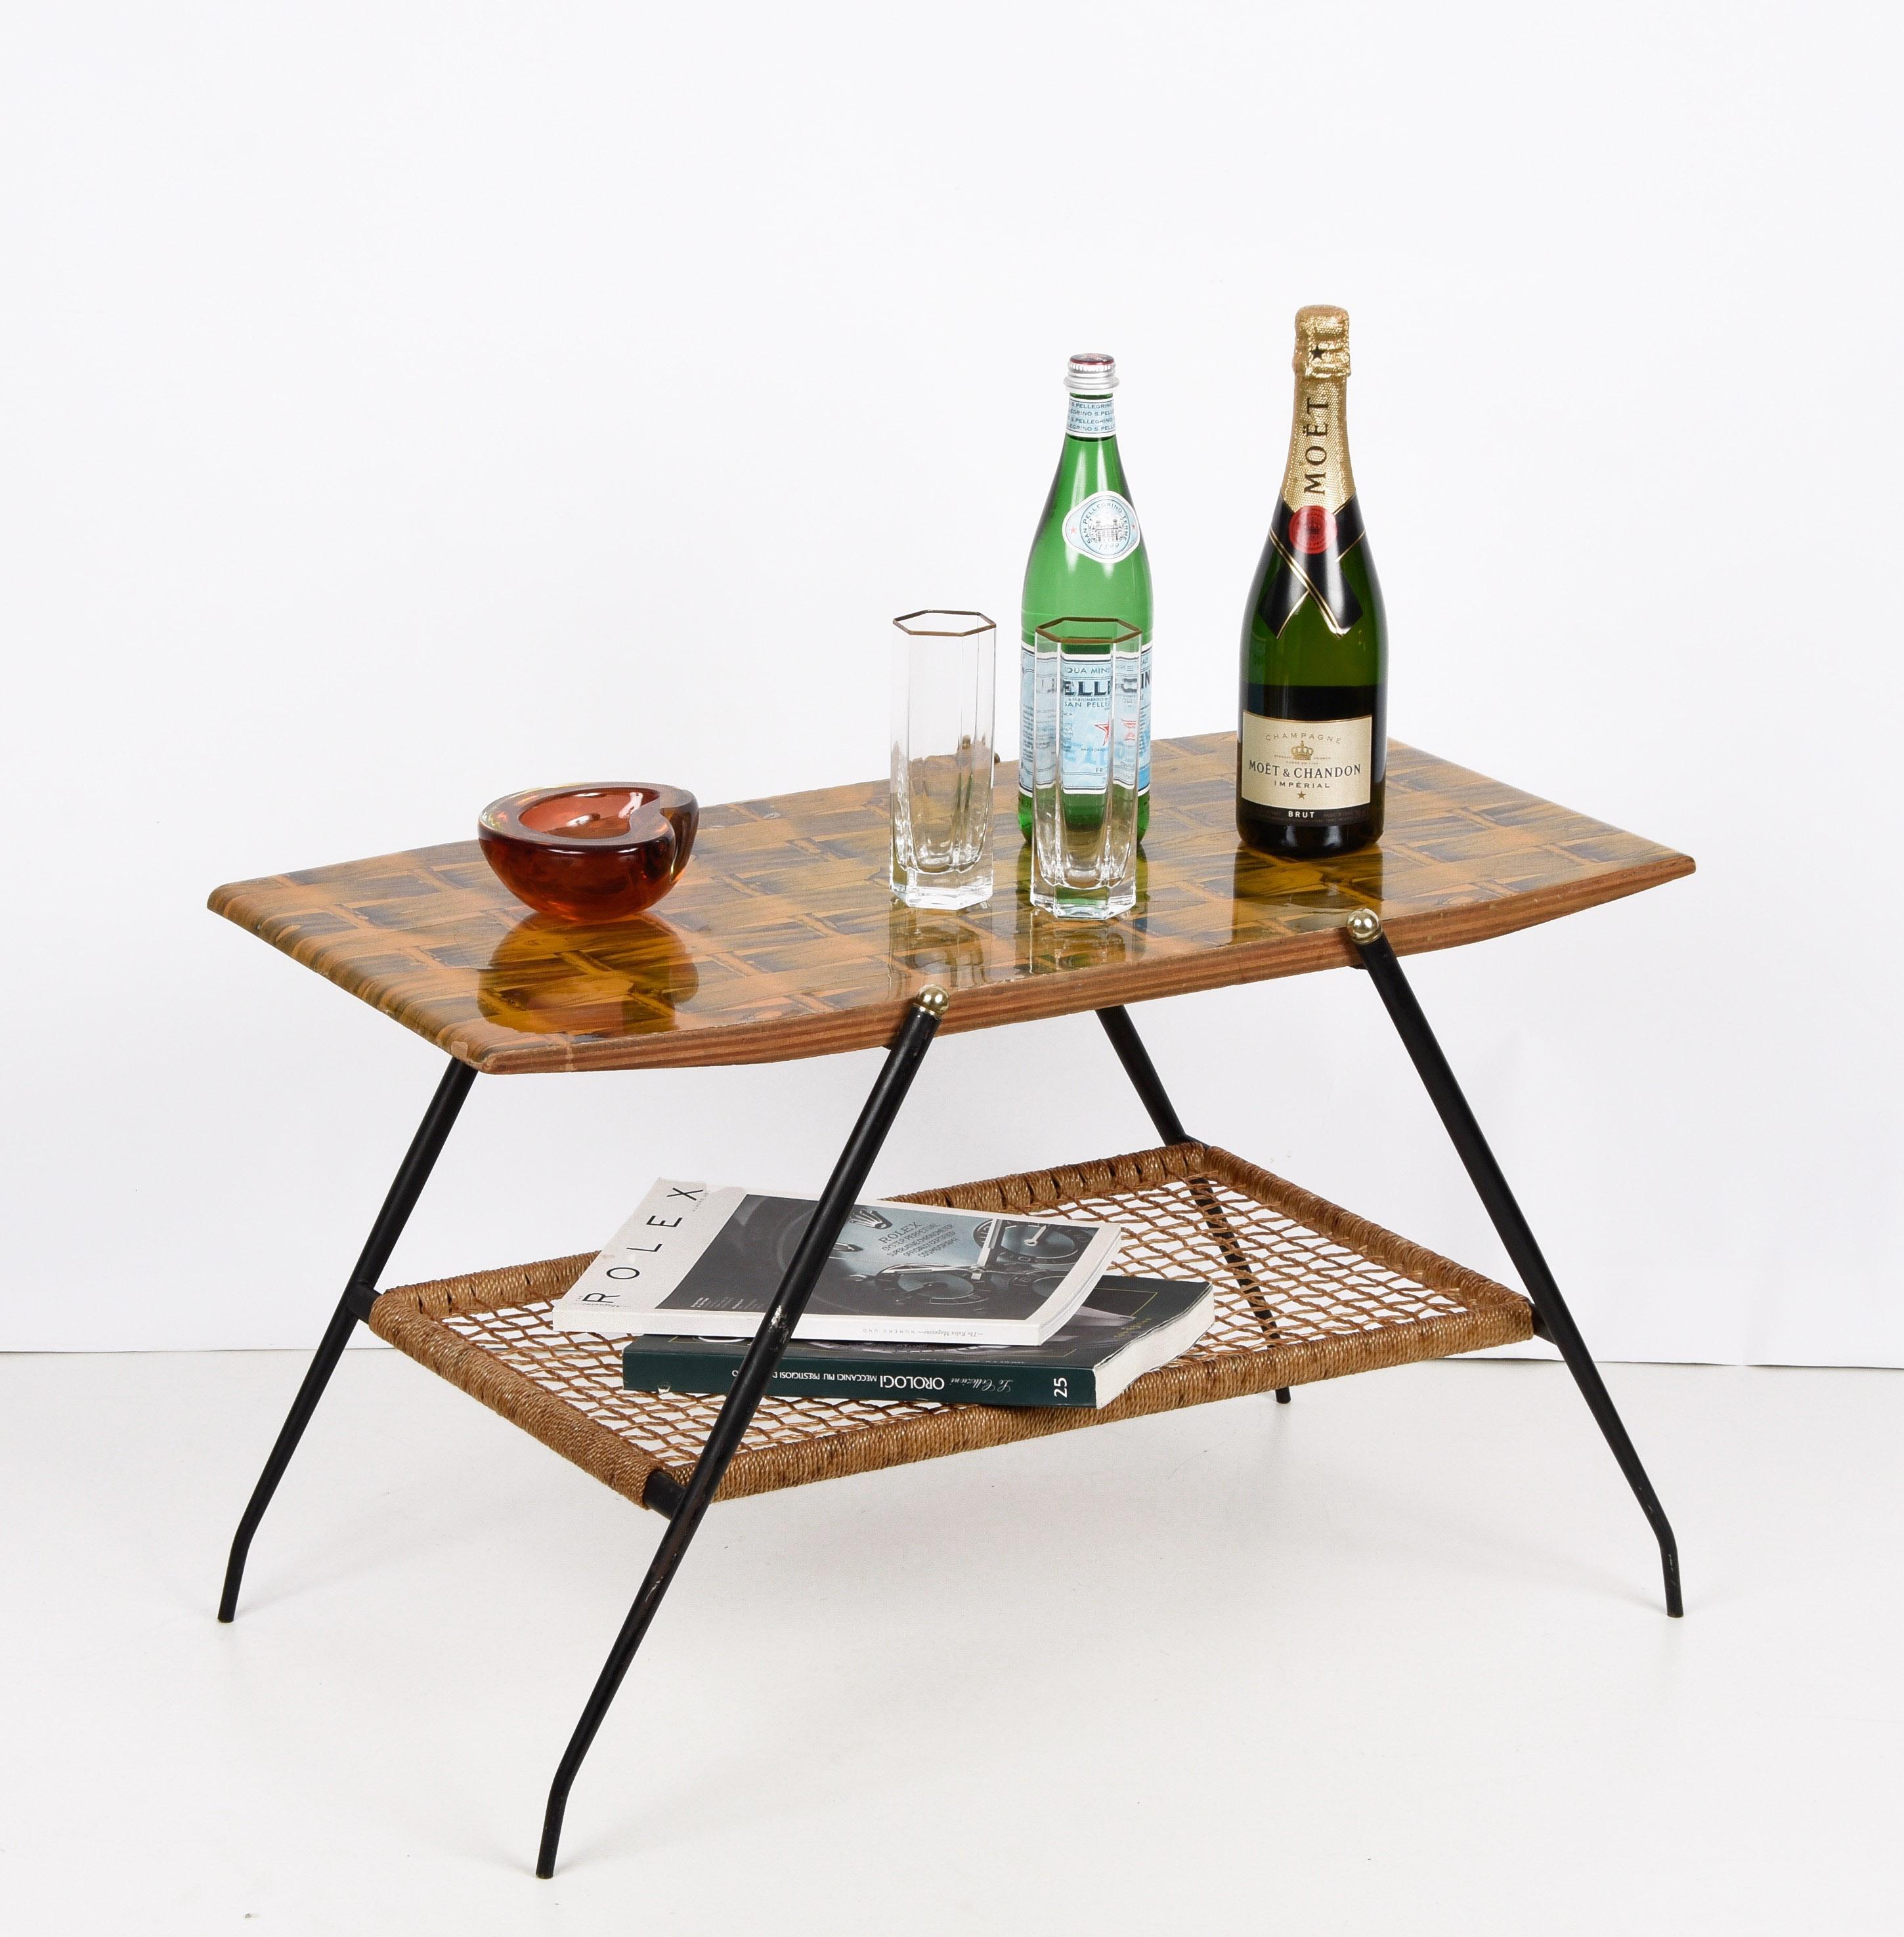 Midcentury Wood and Metal Italian Coffee Table with Brass Magazine Rack, 1950s For Sale 8